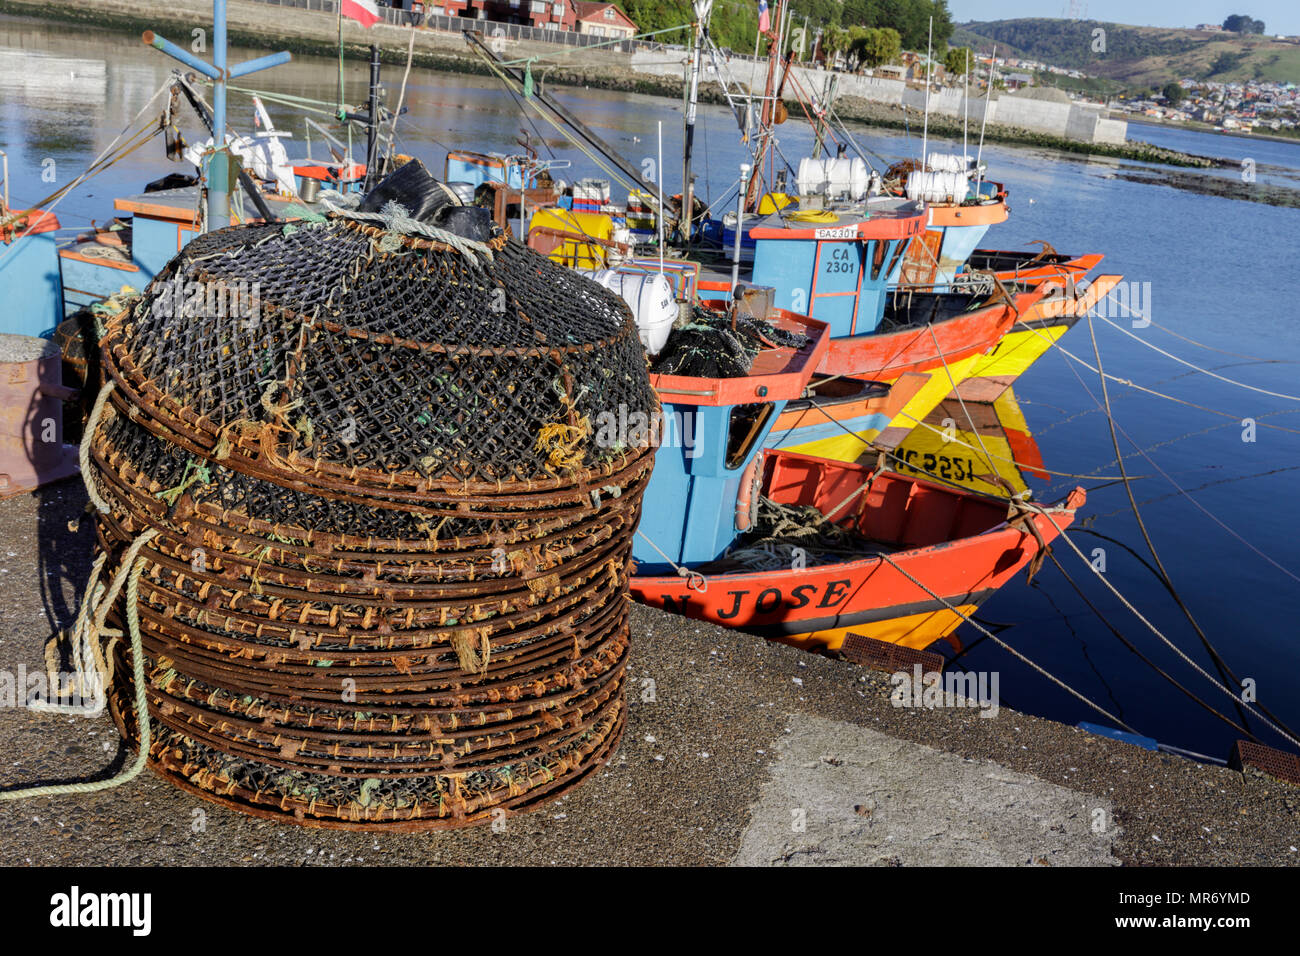 Ancud, Chiloé, Chile: Colorful fishing boats populate the harbor in Ancud, Chiloé. Stock Photo